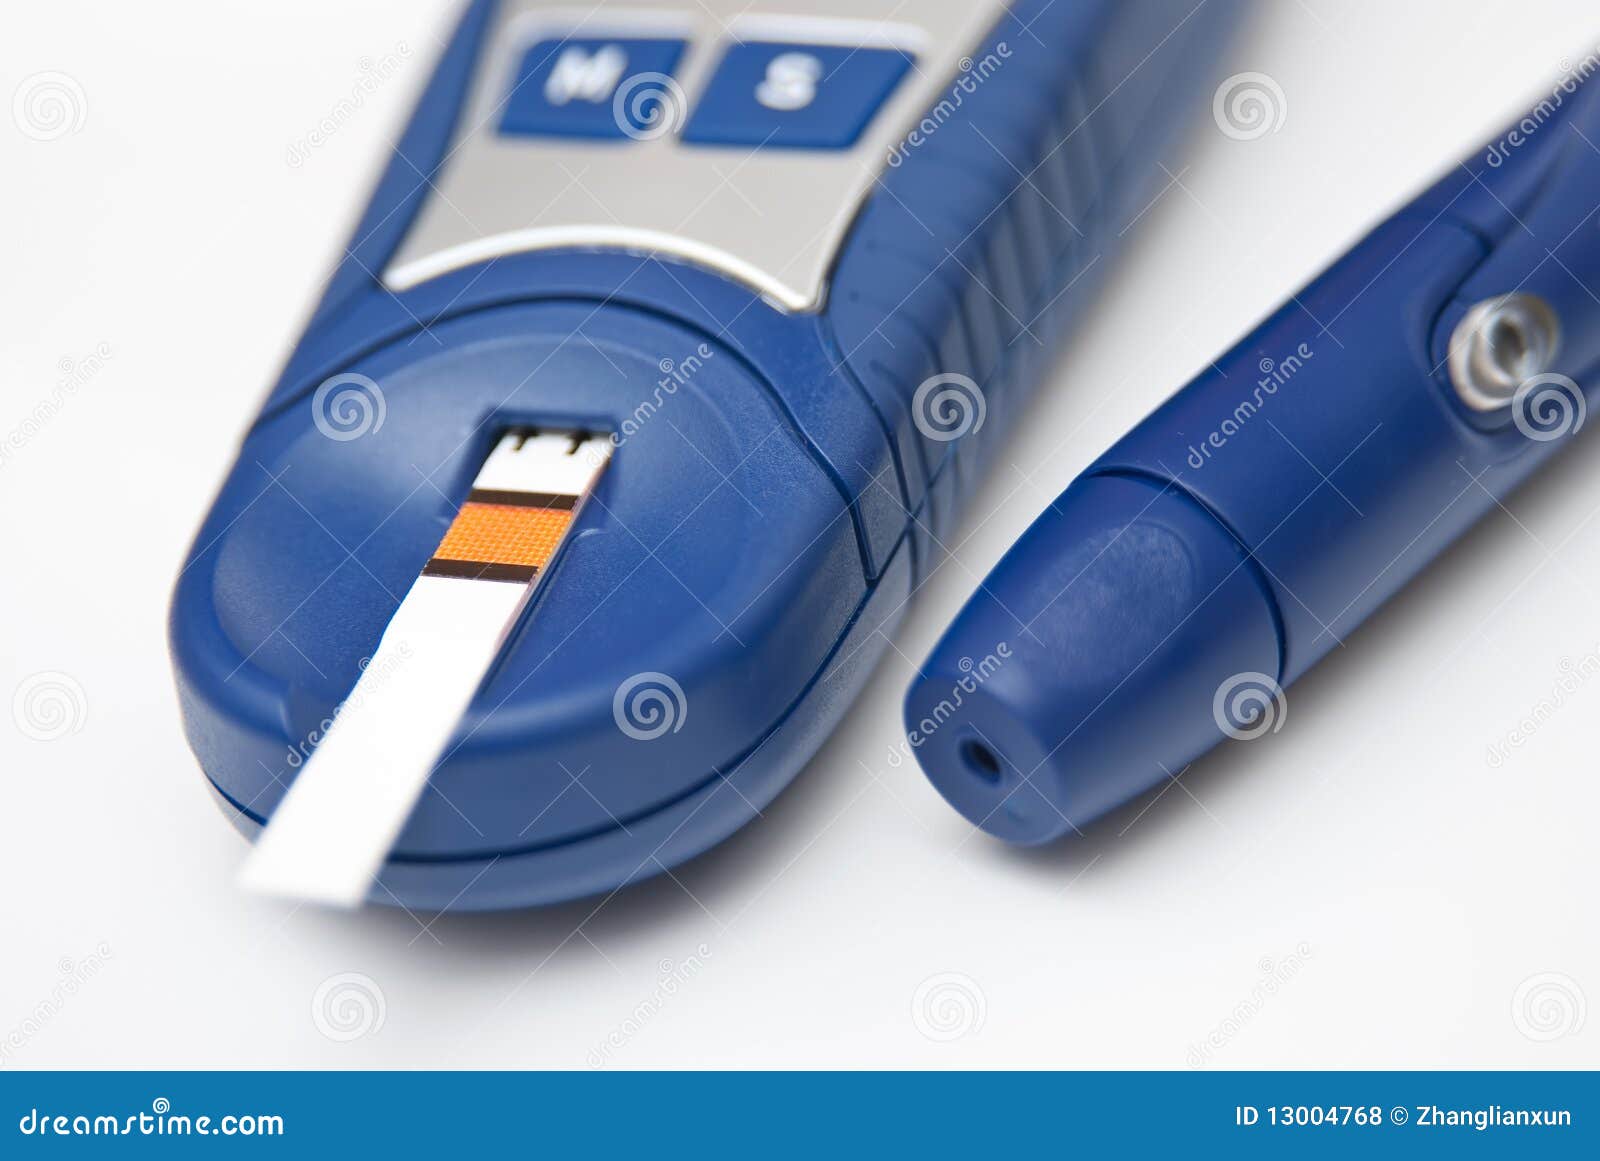 clipart blood glucose monitor - photo #48